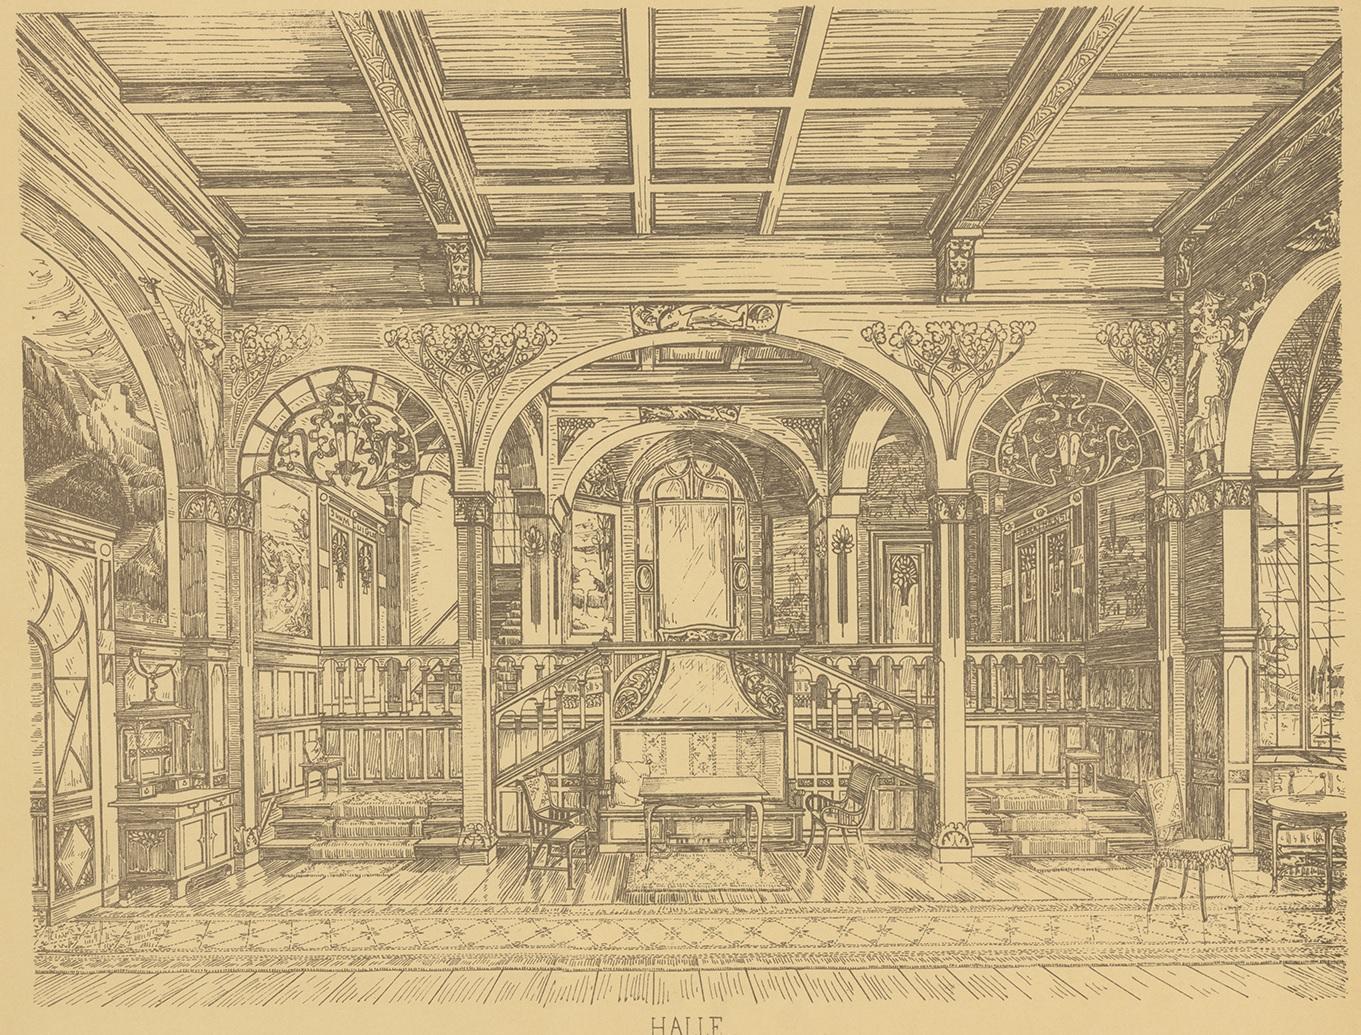 Antique print titled 'Halle'. Lithograph of a hall design. This print originates from 'Det Moderna Hemmet' by Johannes Kramer. Published by Ferdinand Hey'l, circa 1910.